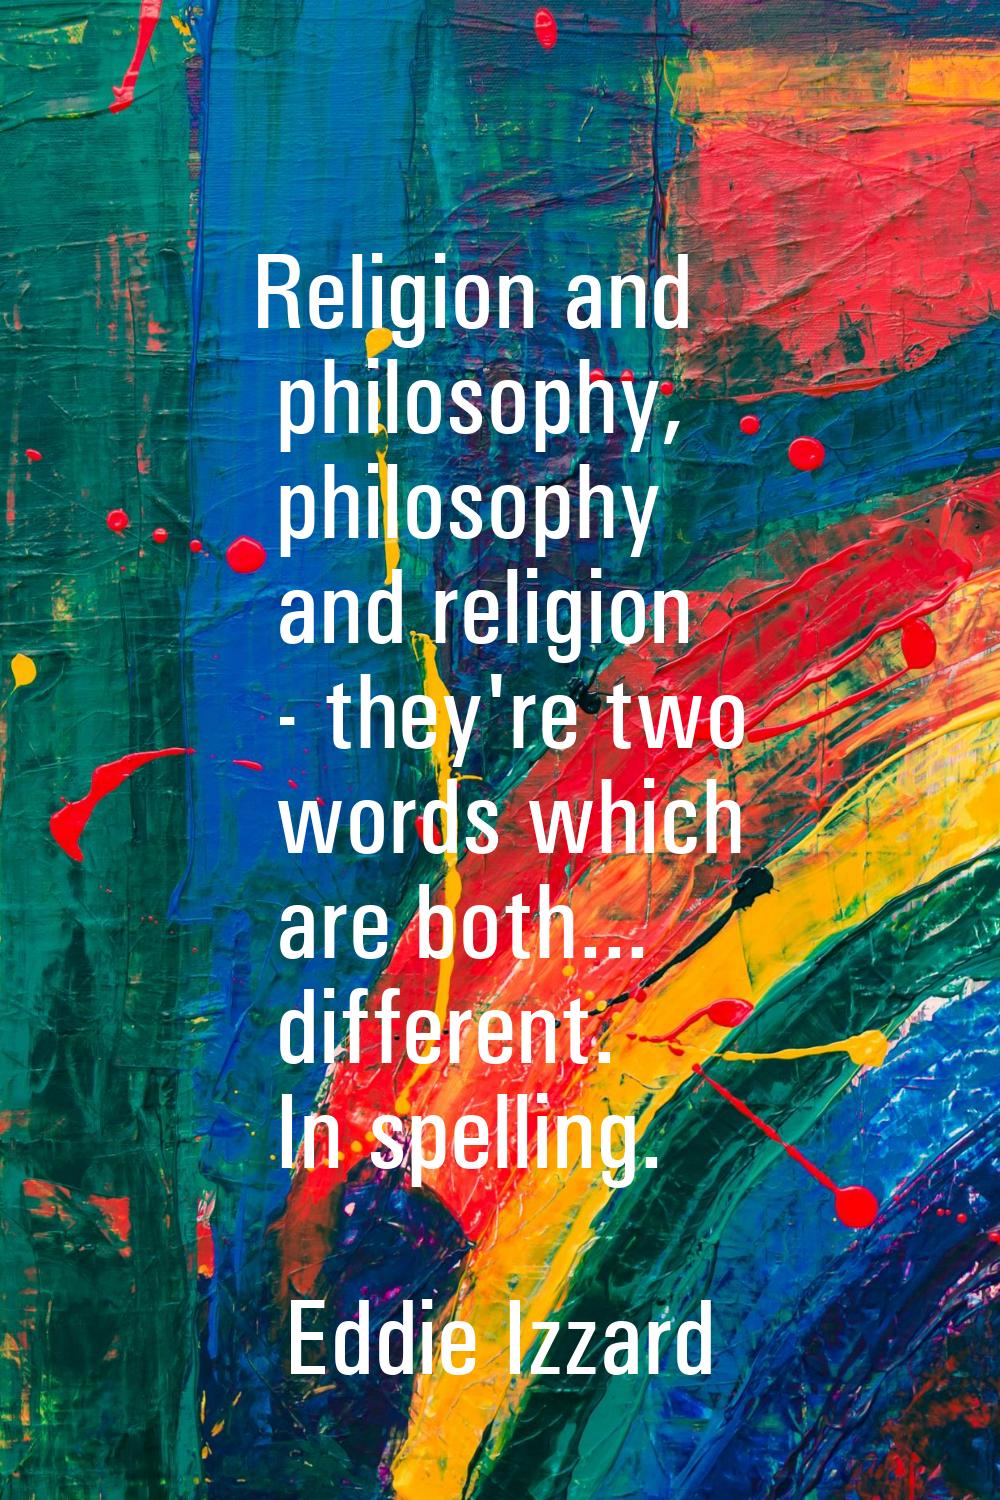 Religion and philosophy, philosophy and religion - they're two words which are both... different. I